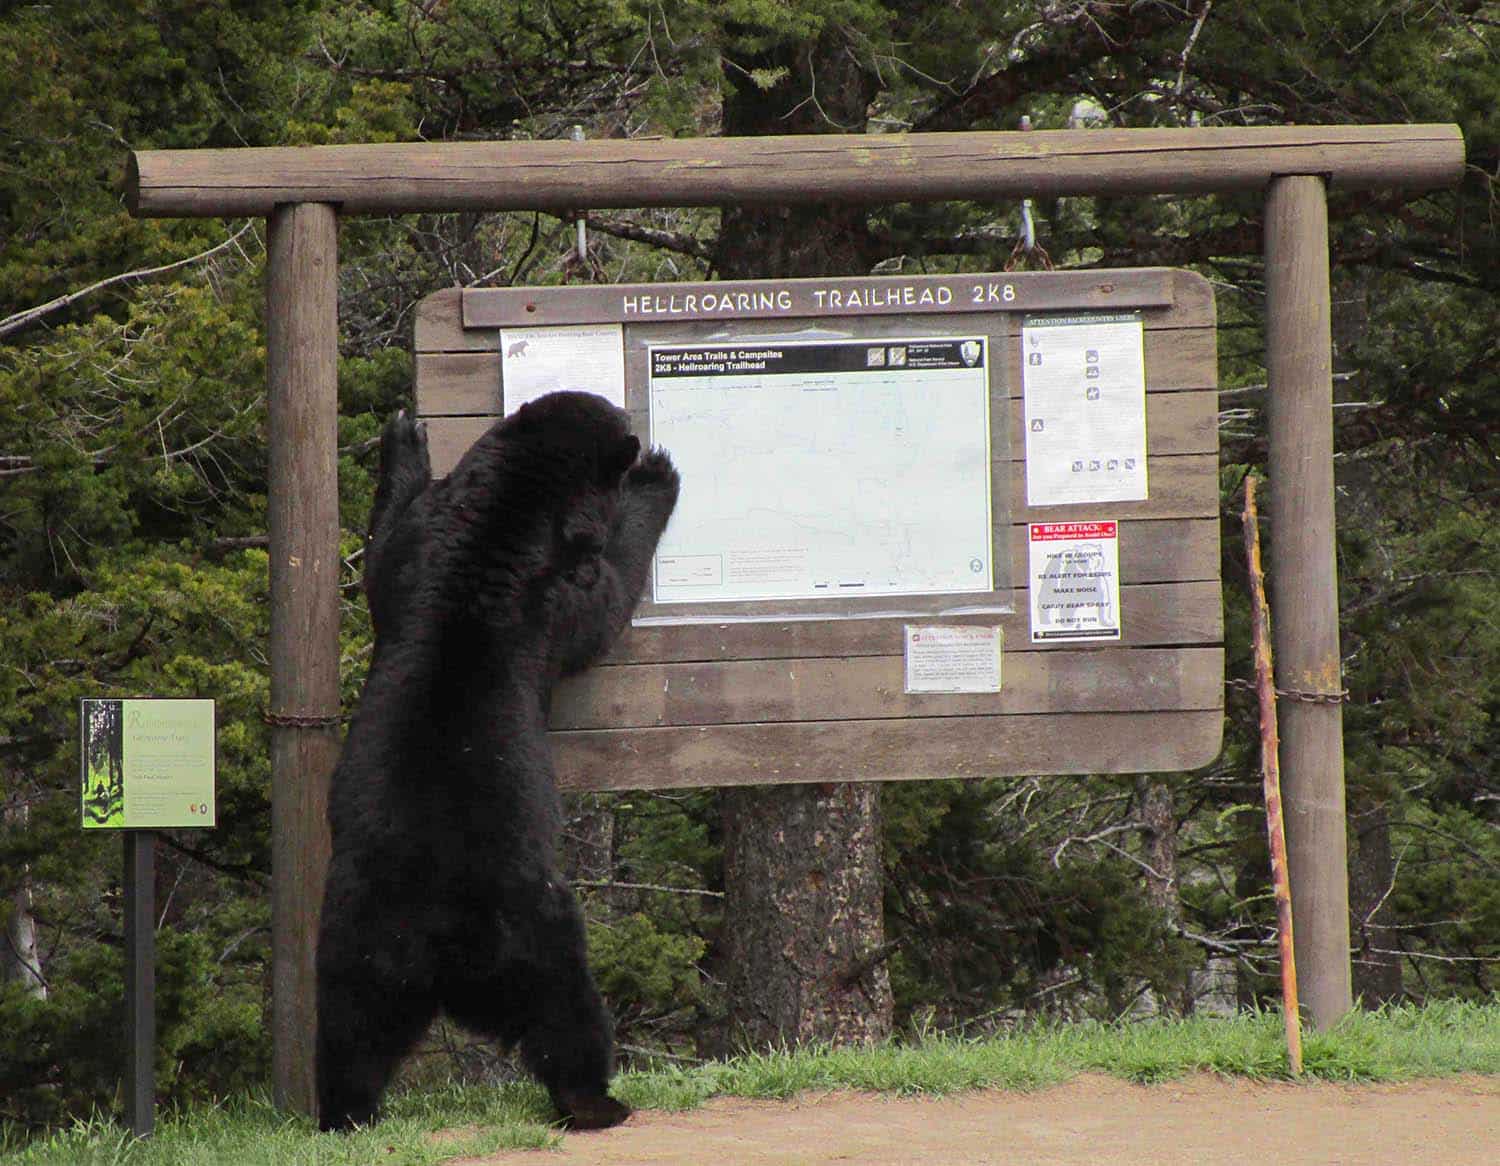 a bear encounters a trailhead sign and looks at it closely